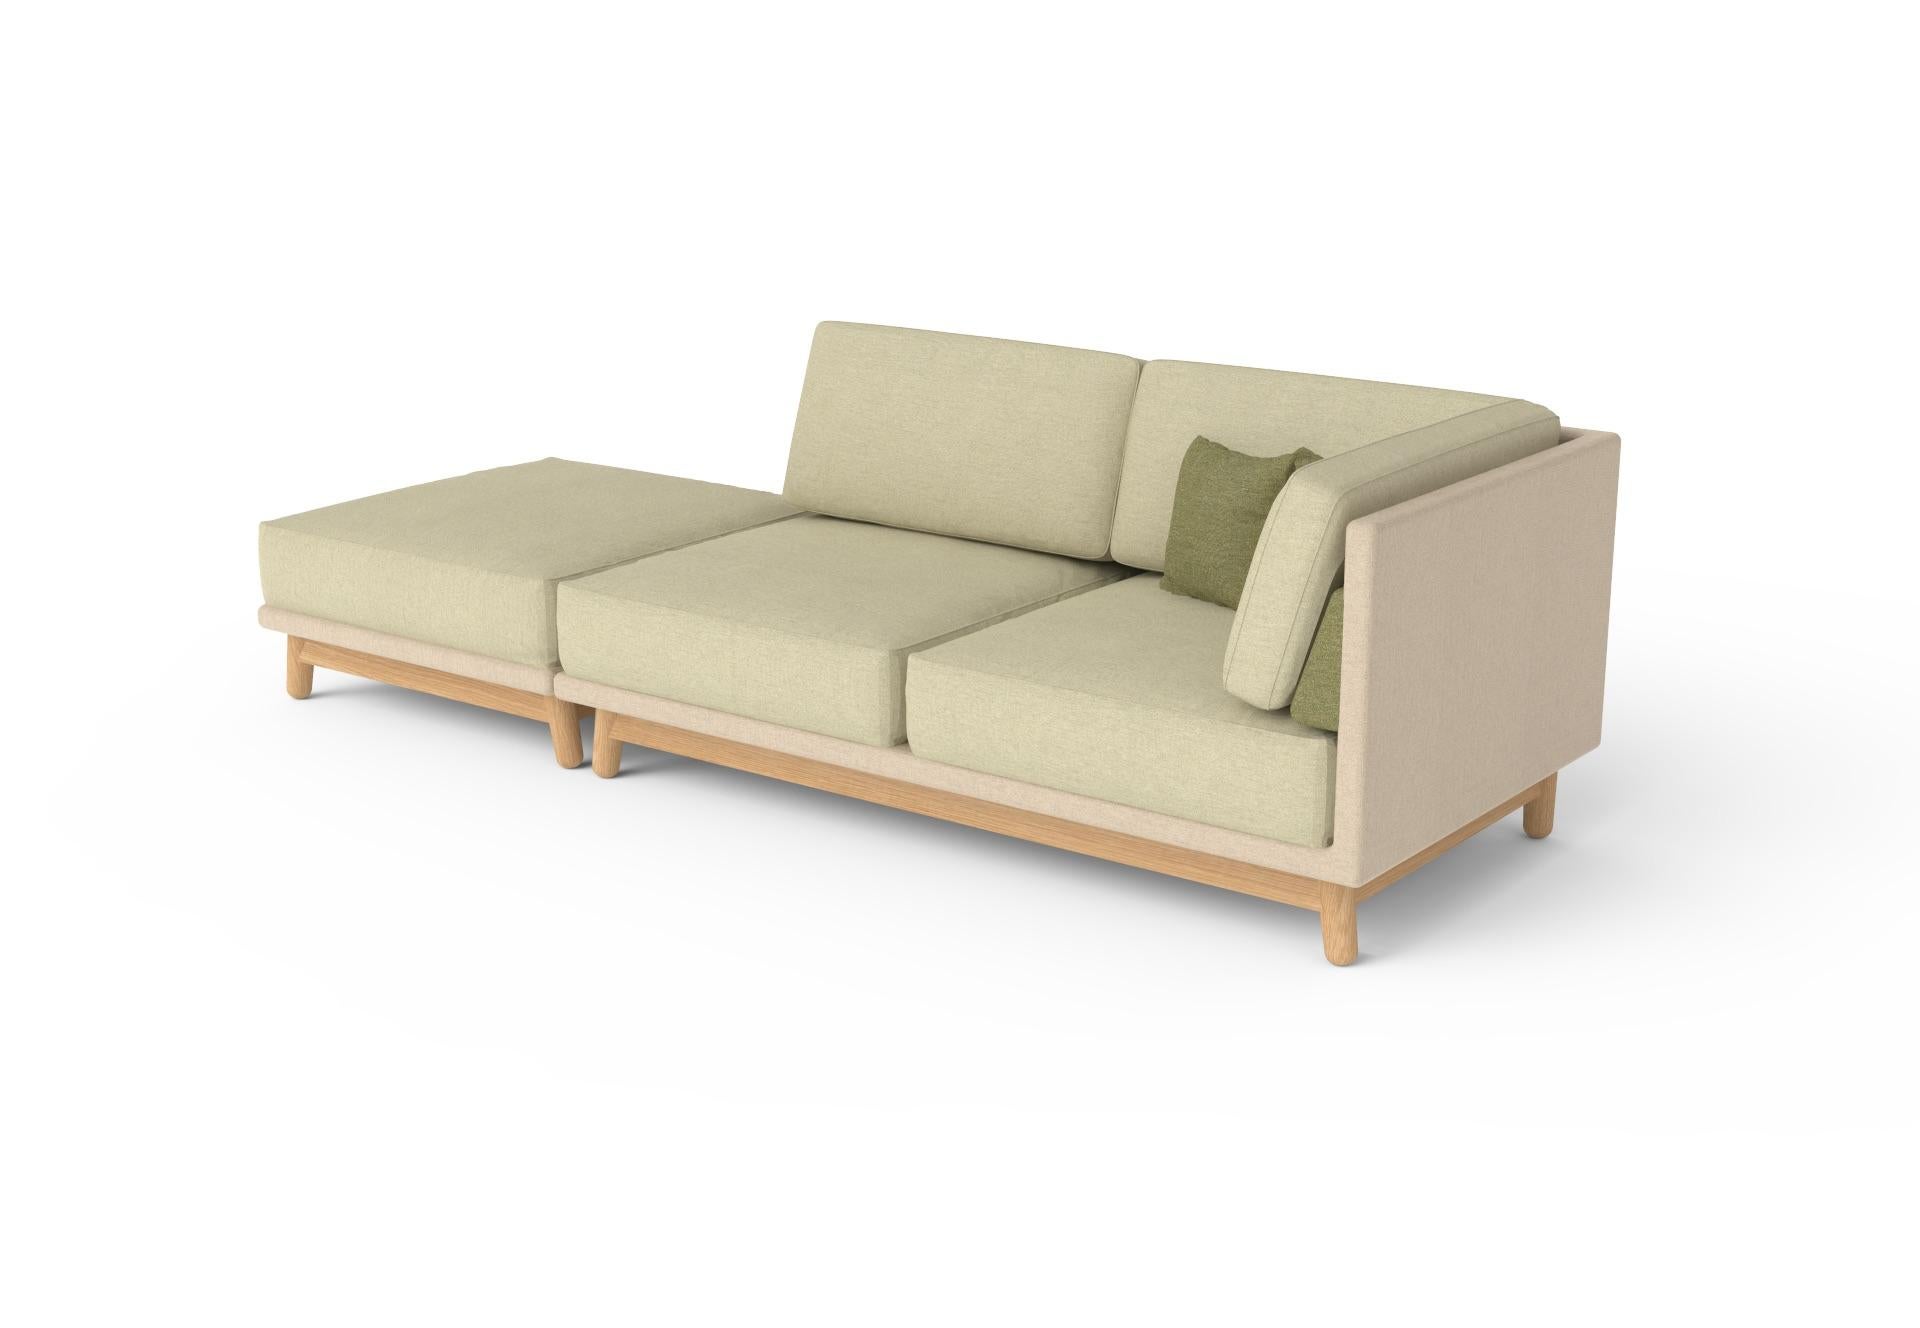 Woodwork Fernandez Corner Sofa, Wood and Fabric, Contemporary Mexican Design